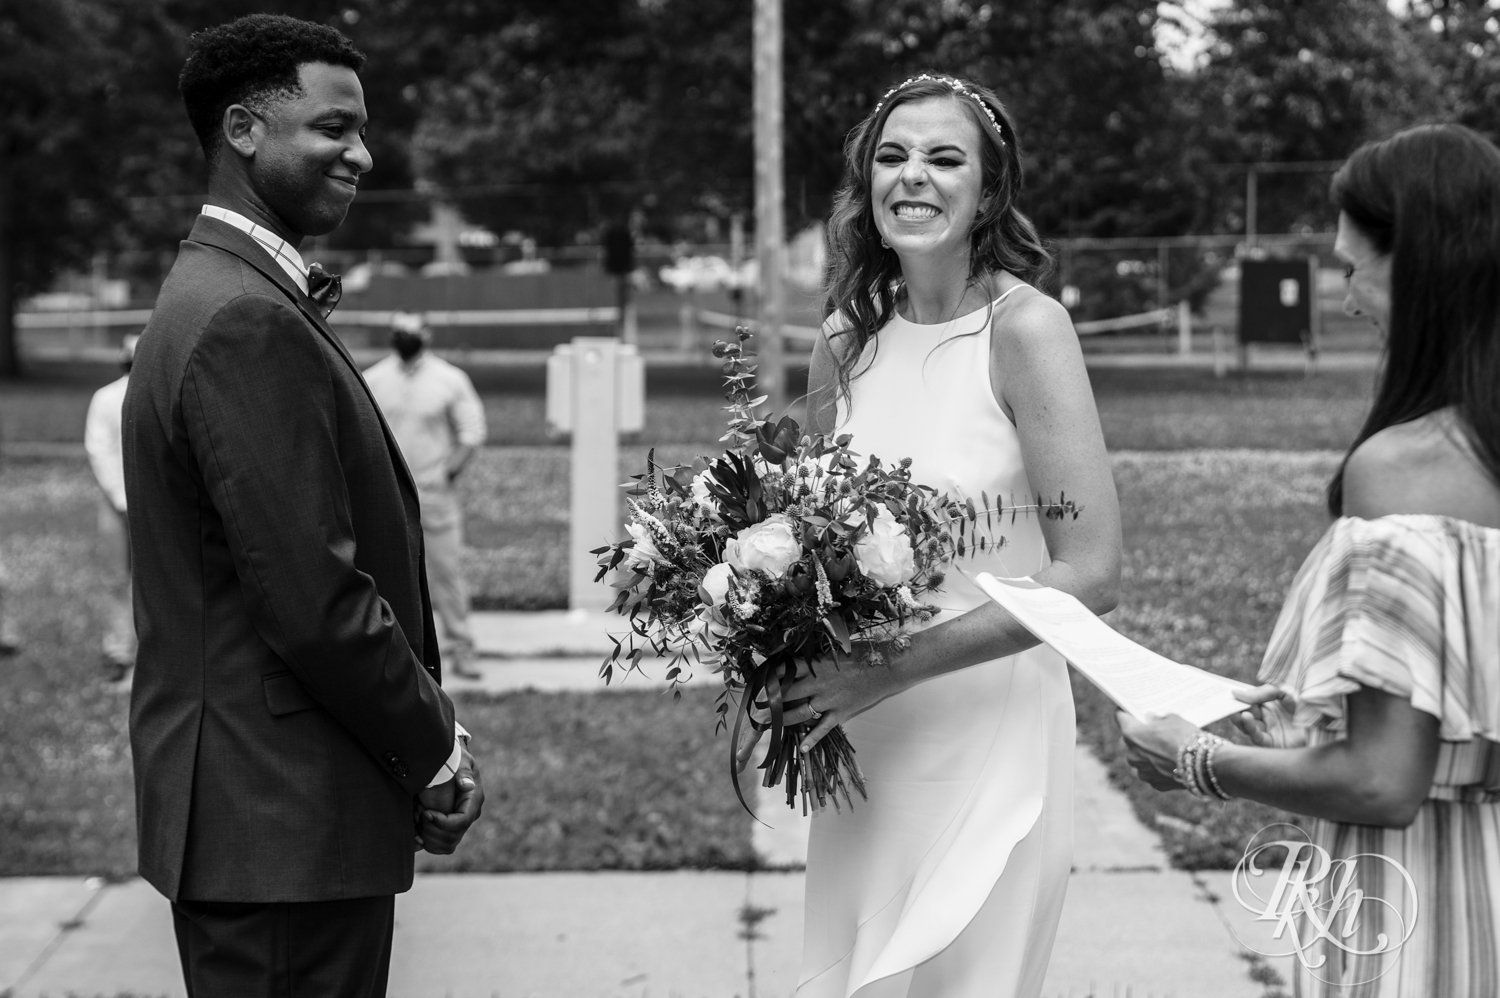 Black man and woman biracial couple hold hands during wedding ceremony in Loring Park in Minneapolis, Minnesota.